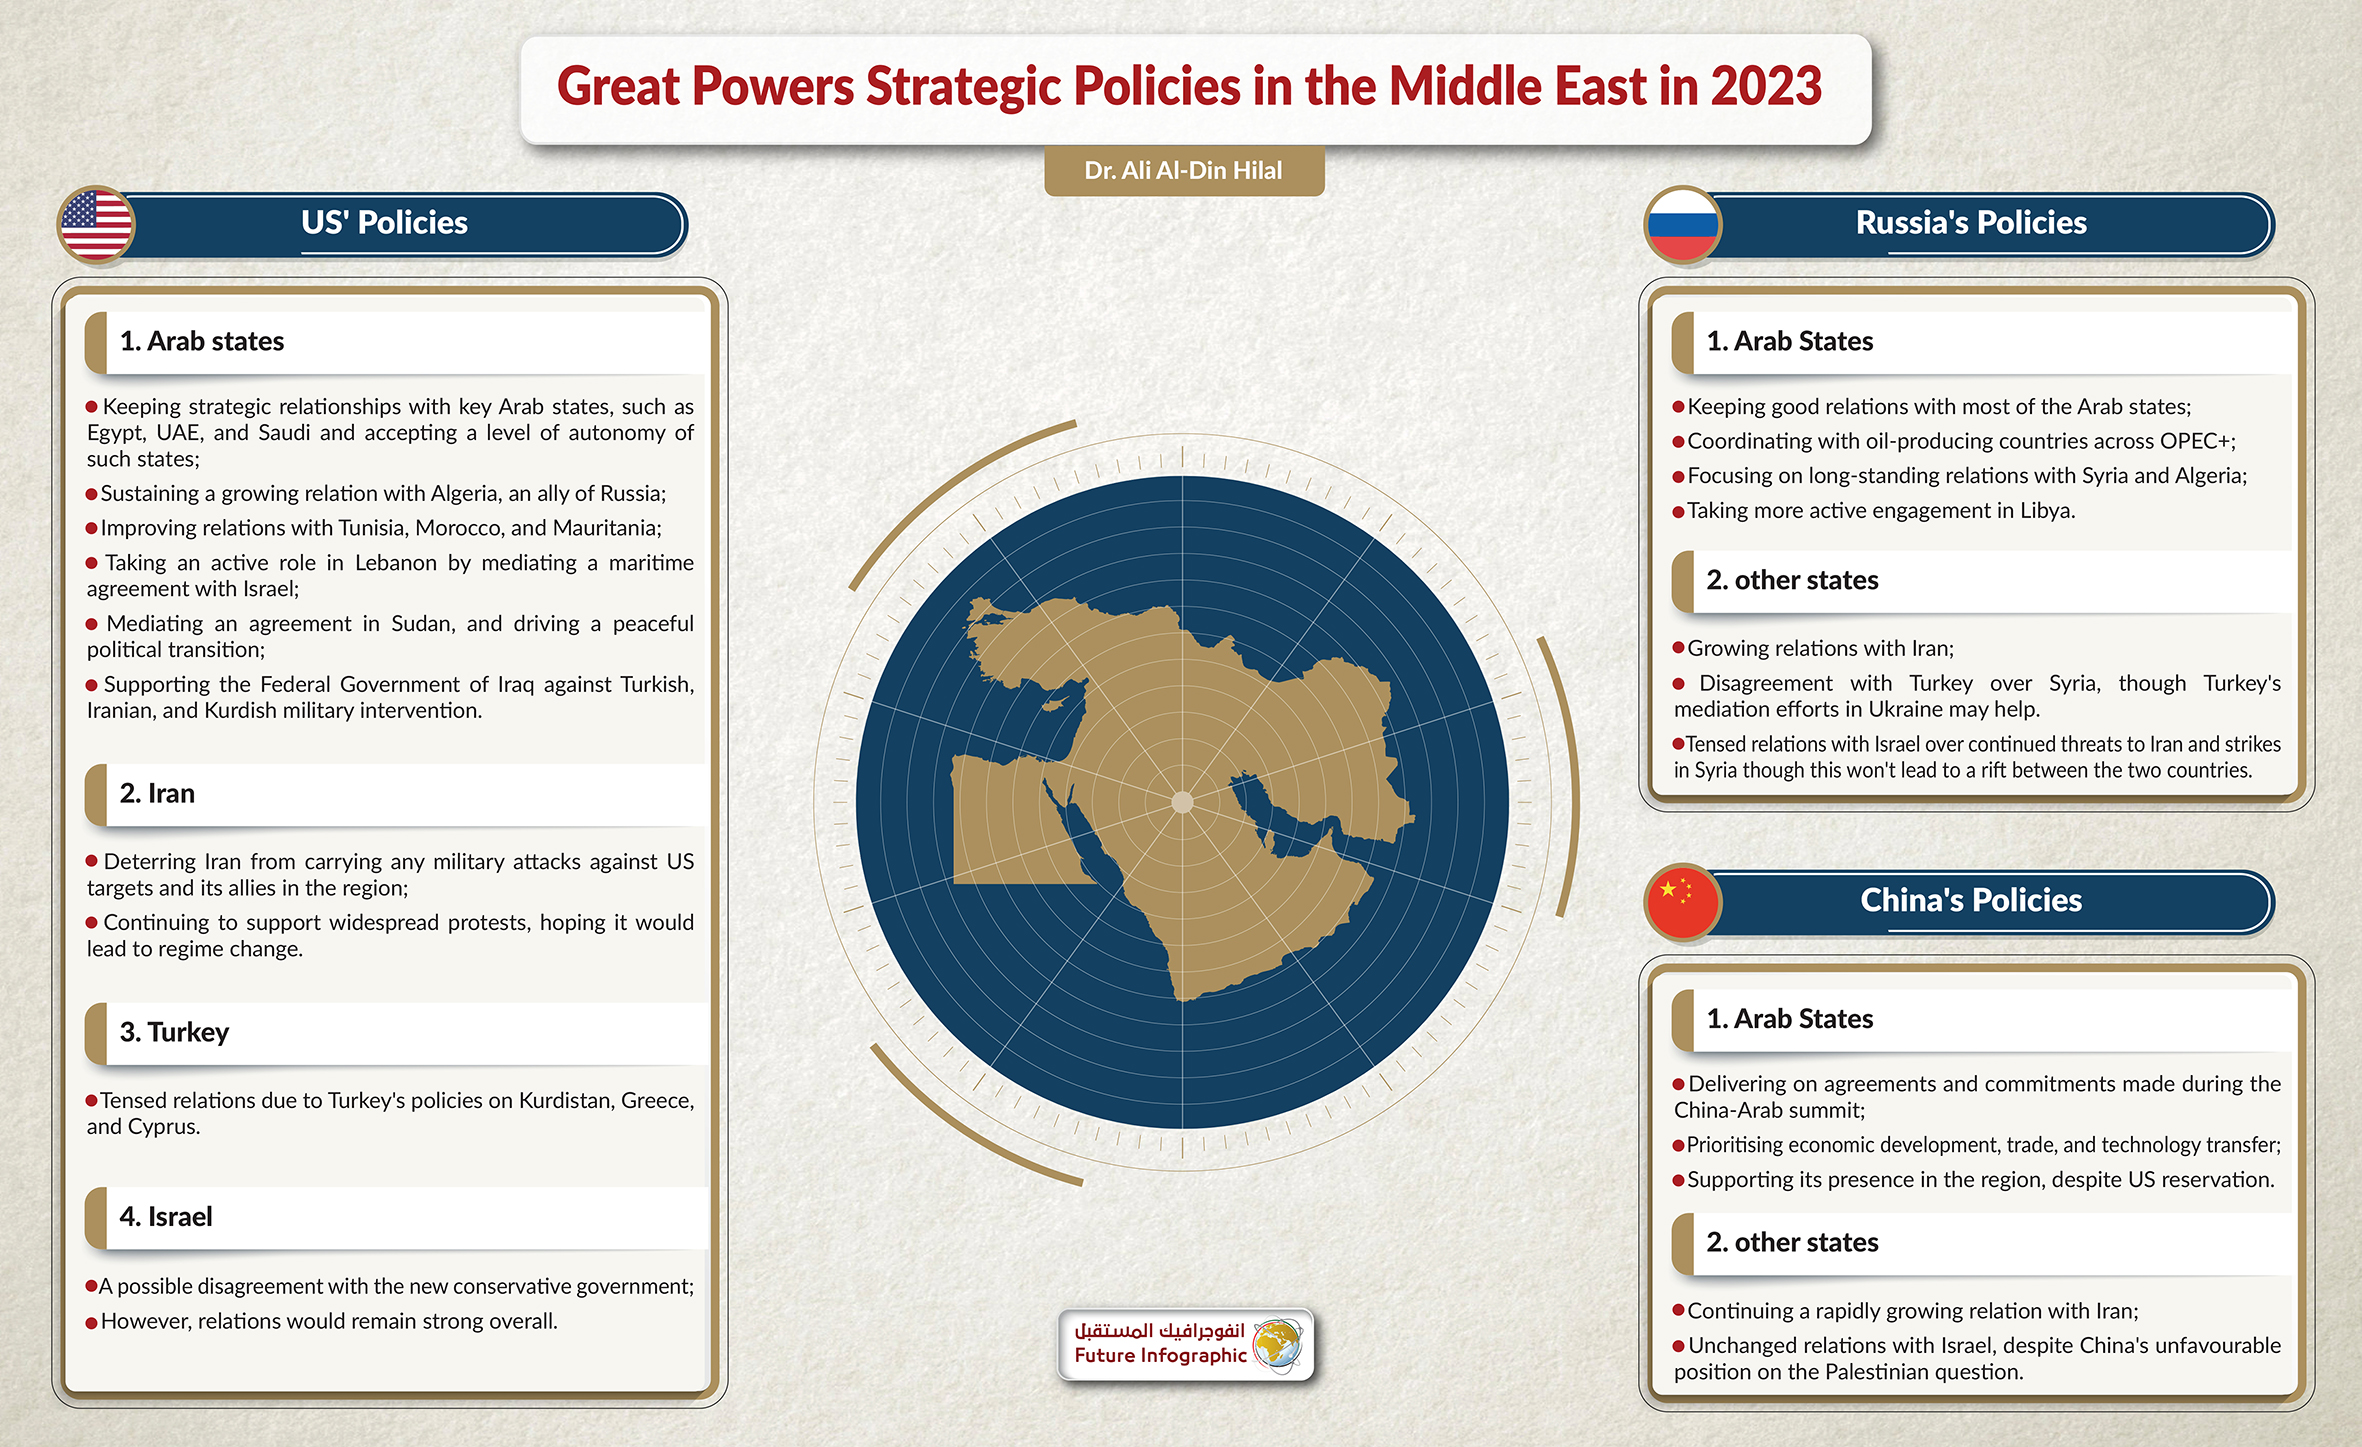 Great Powers' Strategic Policies in the Middle East in 2023